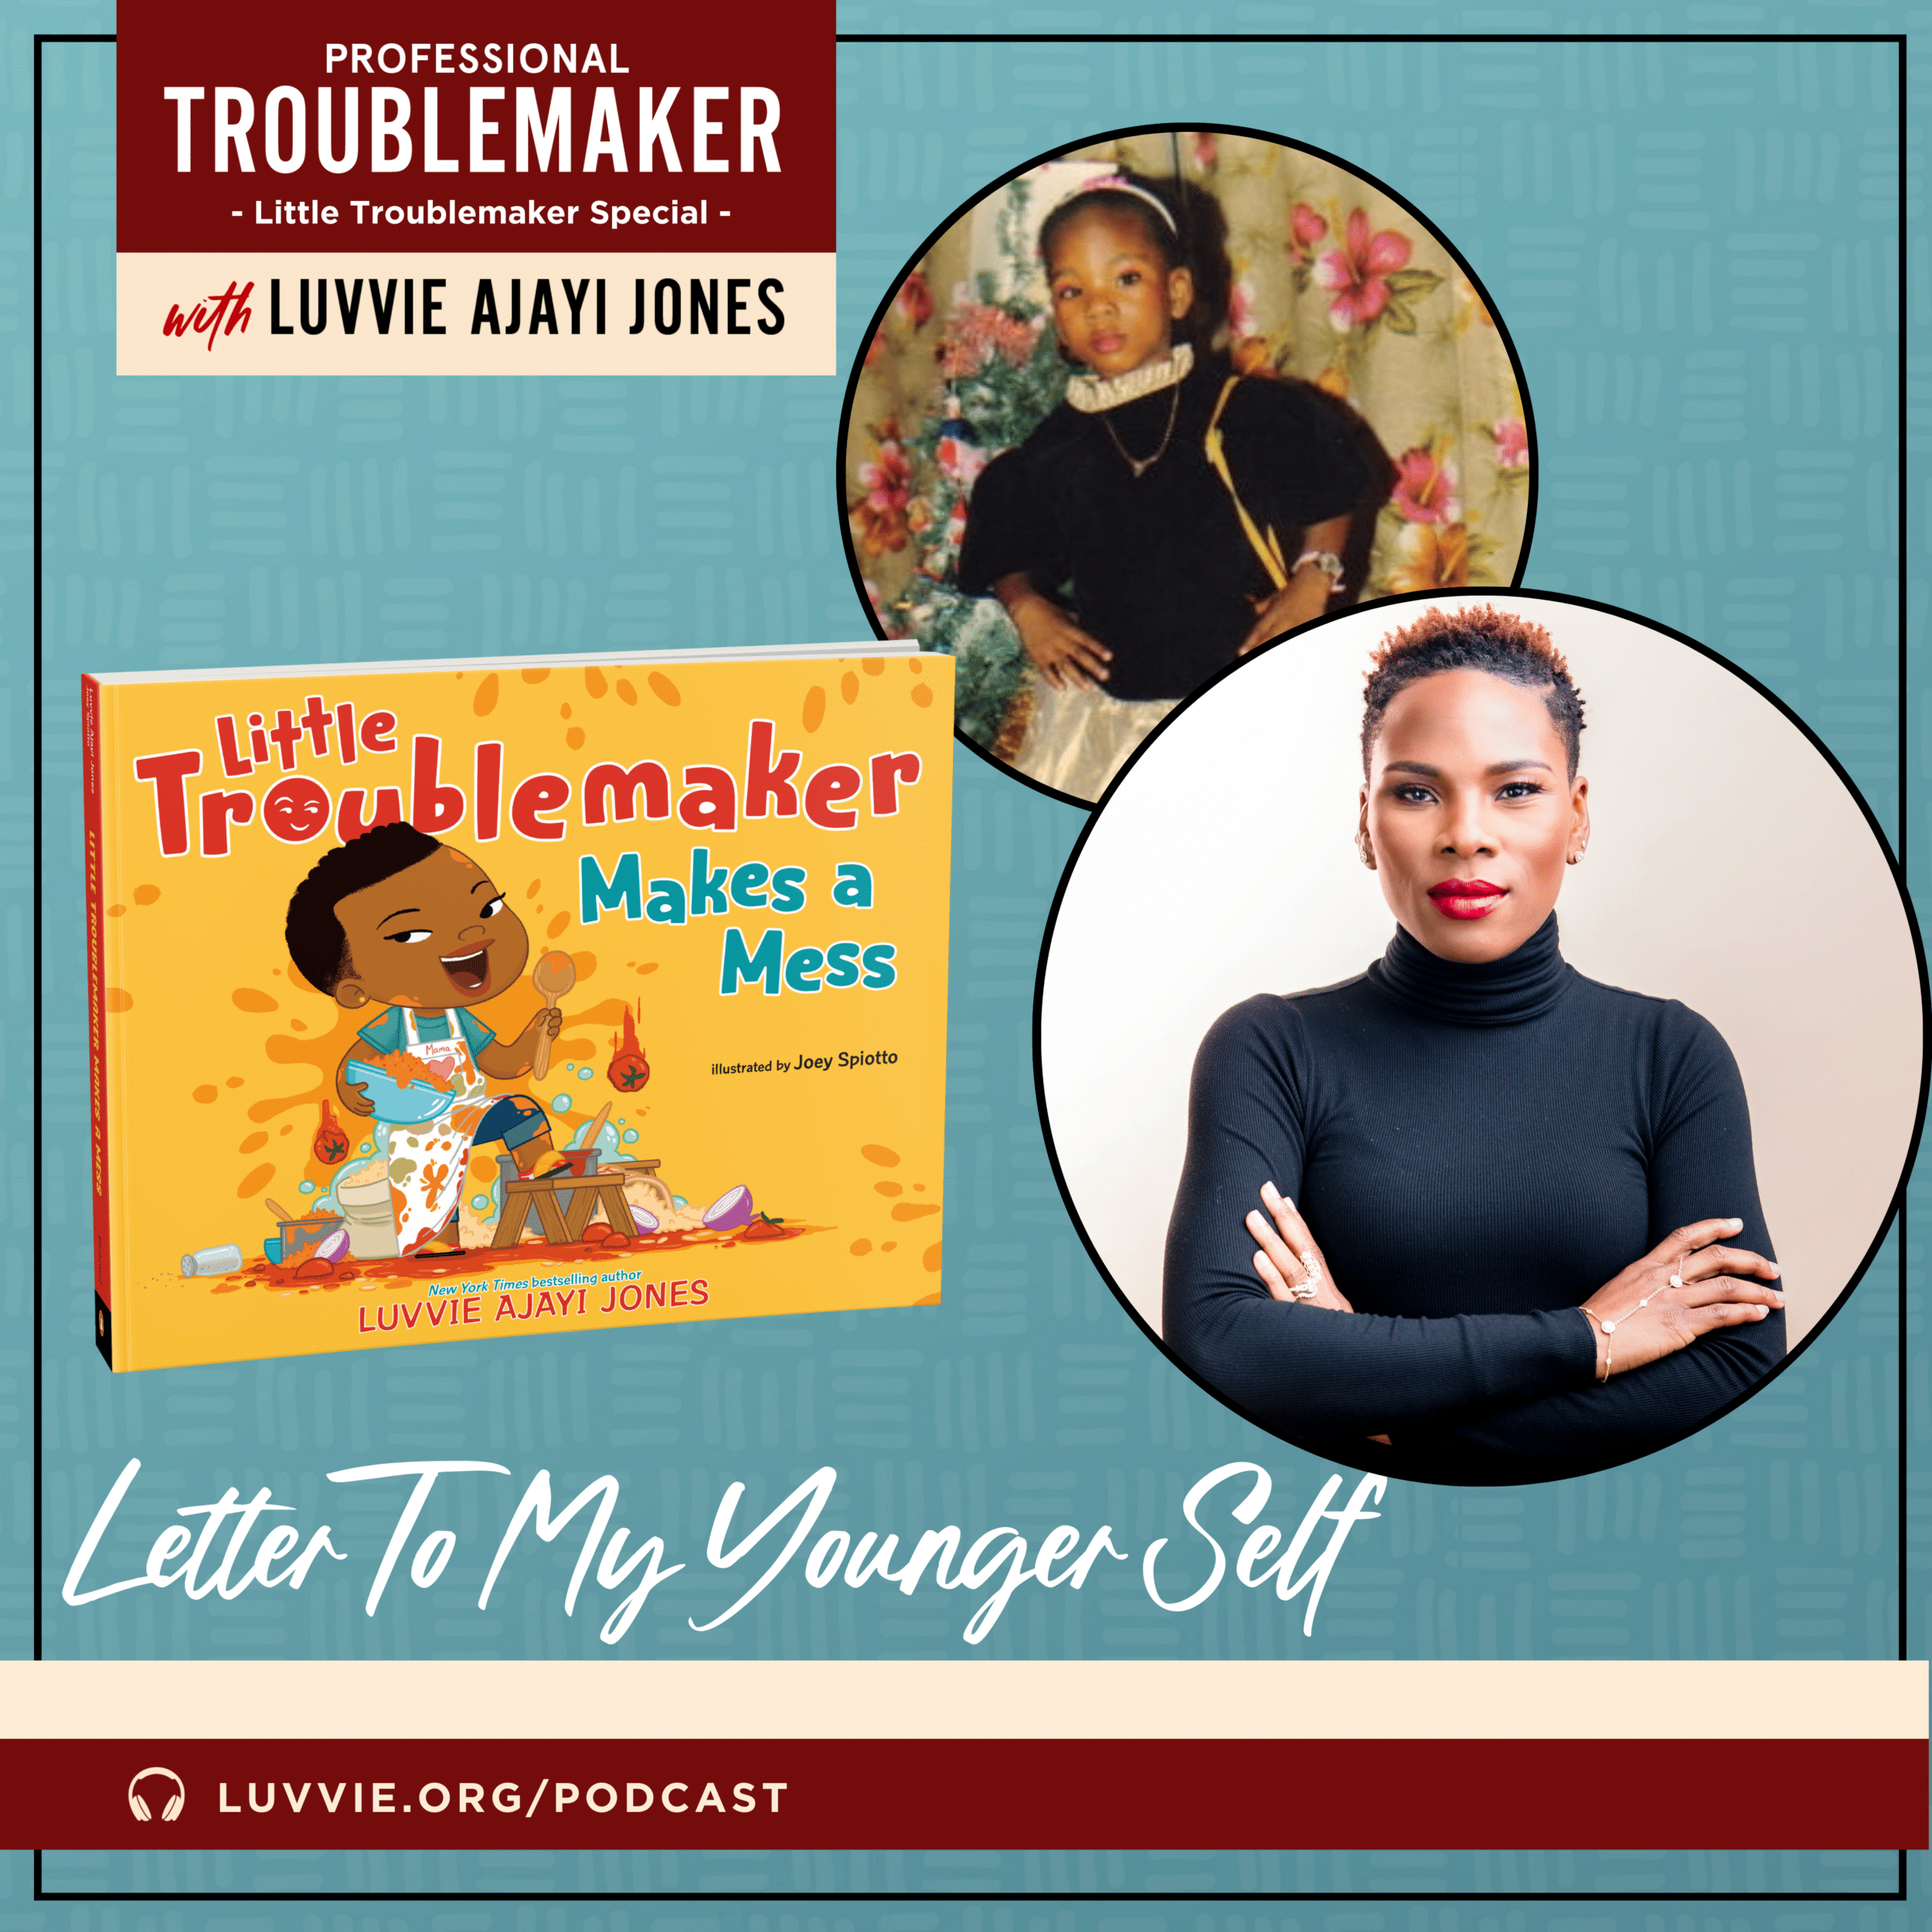 Letter to My Younger Self - Professional Troublemaker Little Troublemaker Podcast